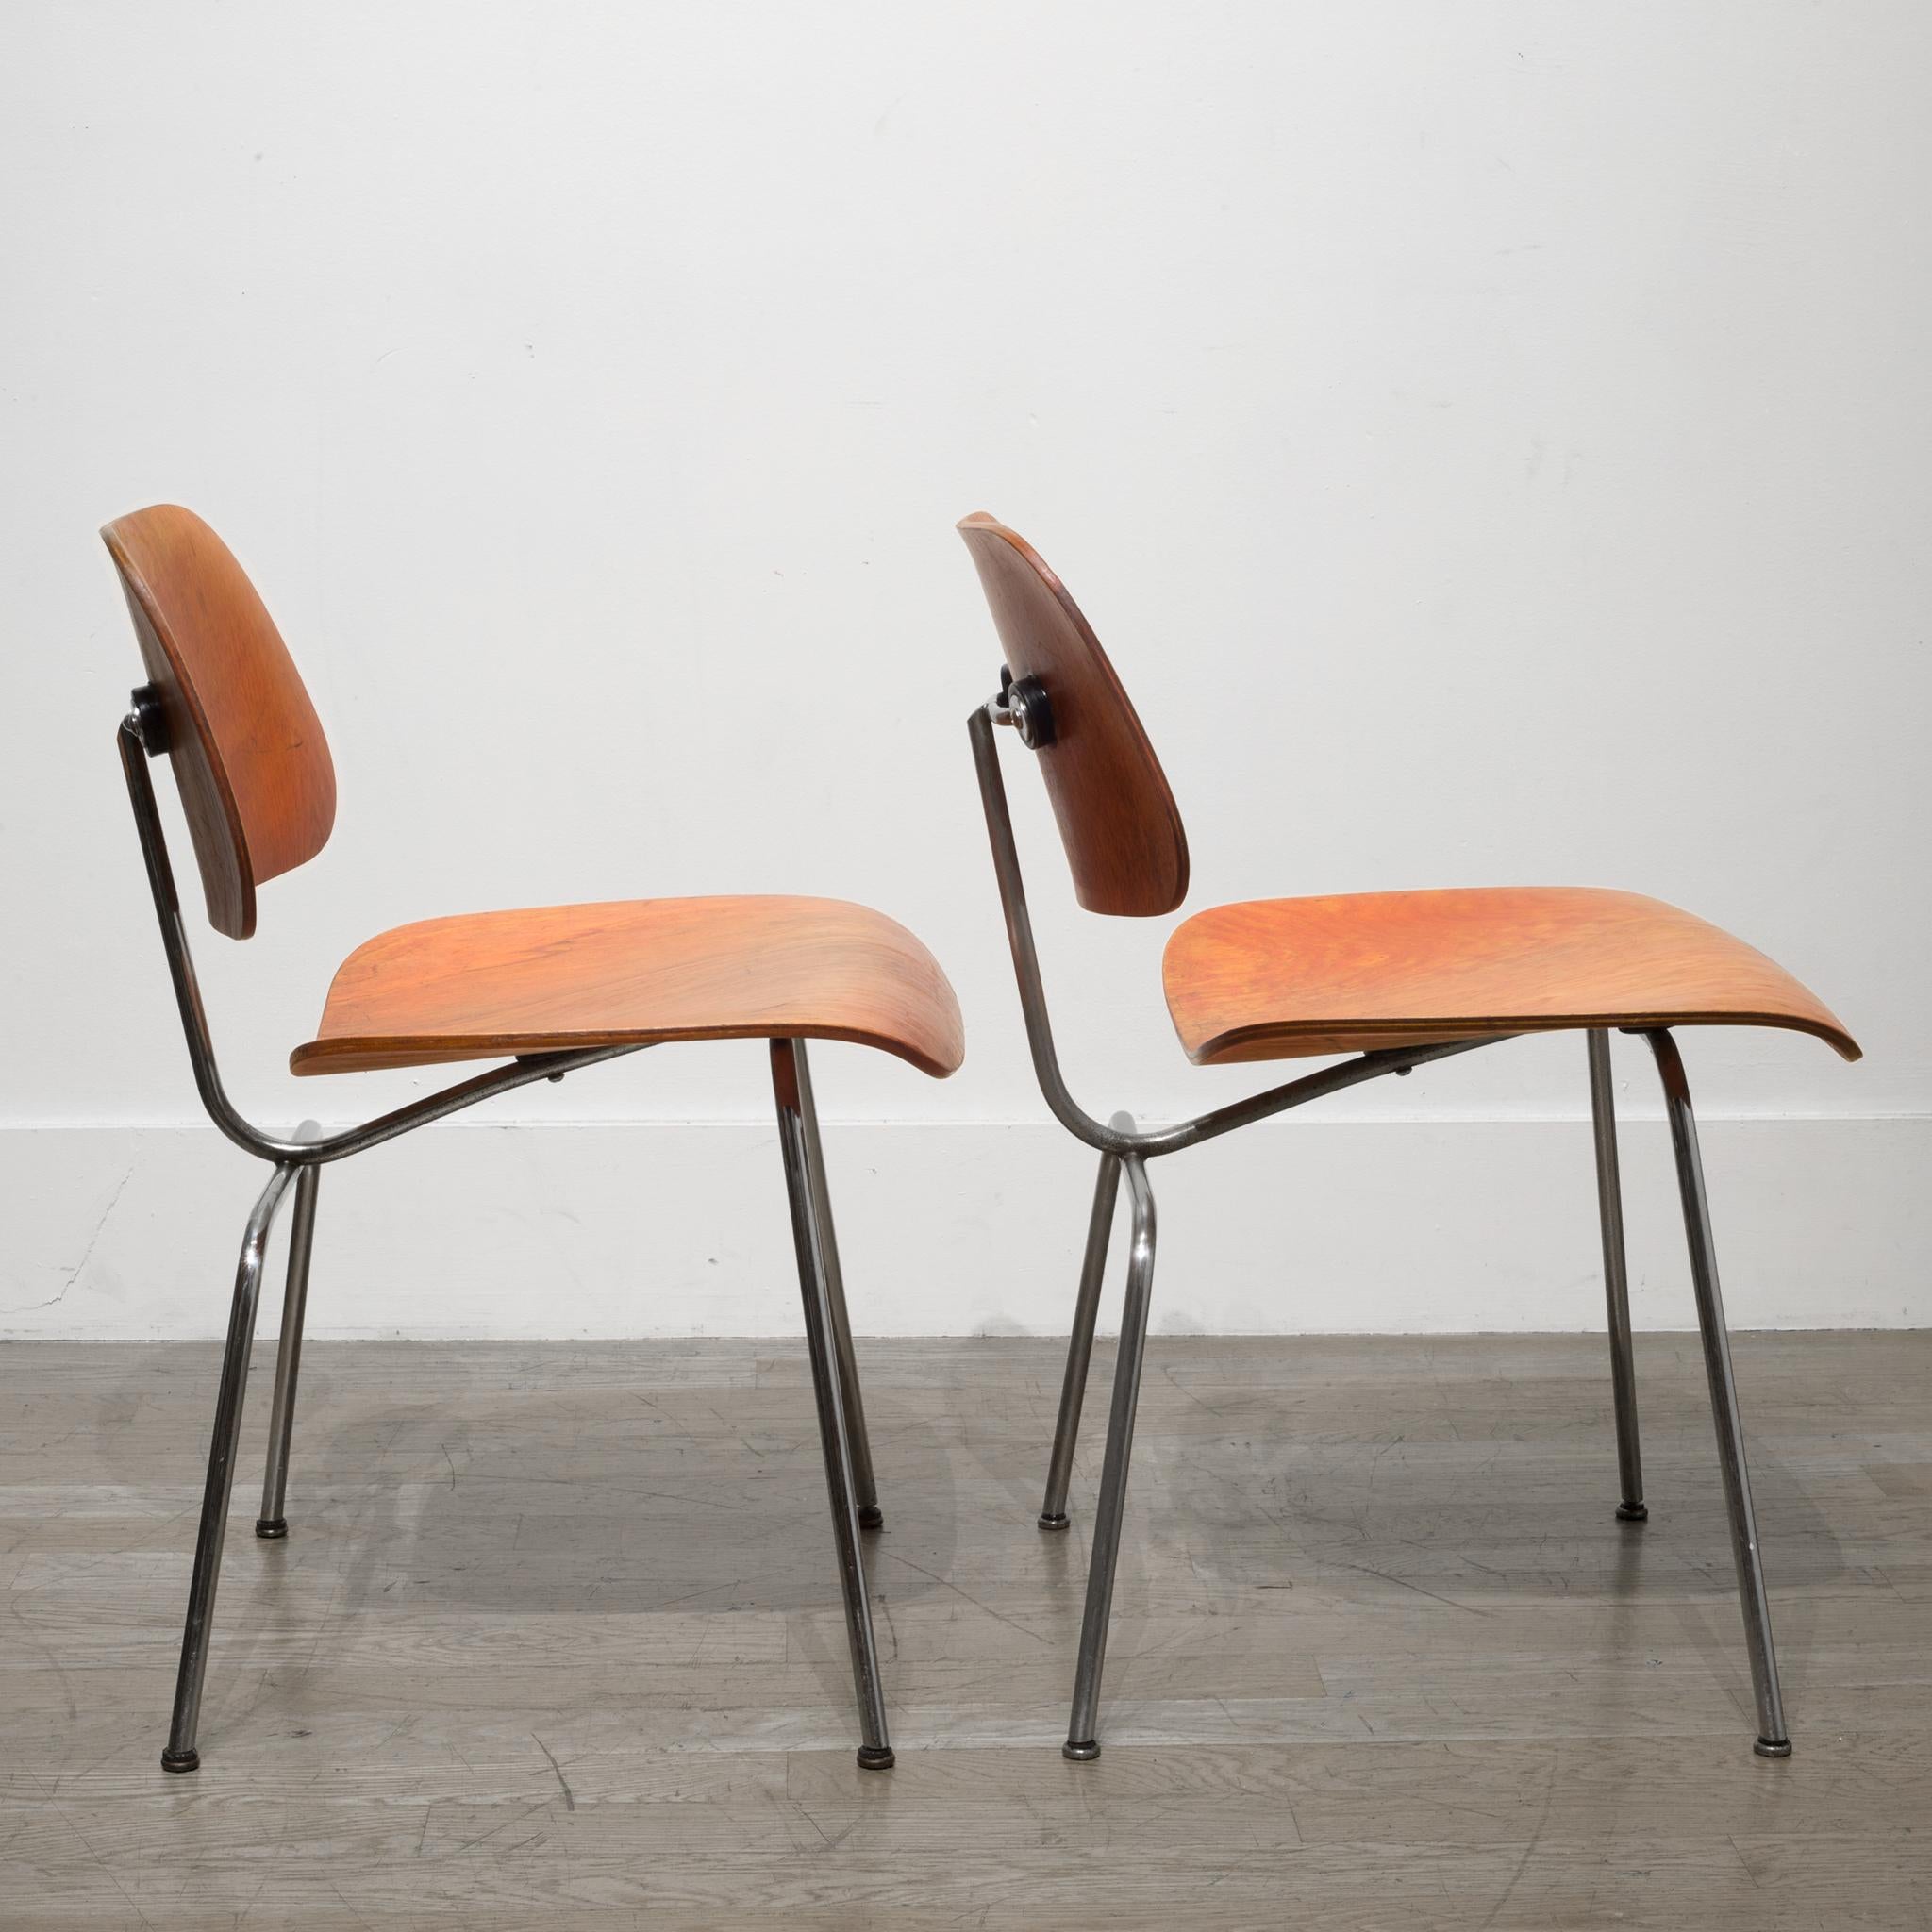 Metal Set of Rare Red Aniline Herman Miller DCM Chairs, possibly Evans circa 1950-1960